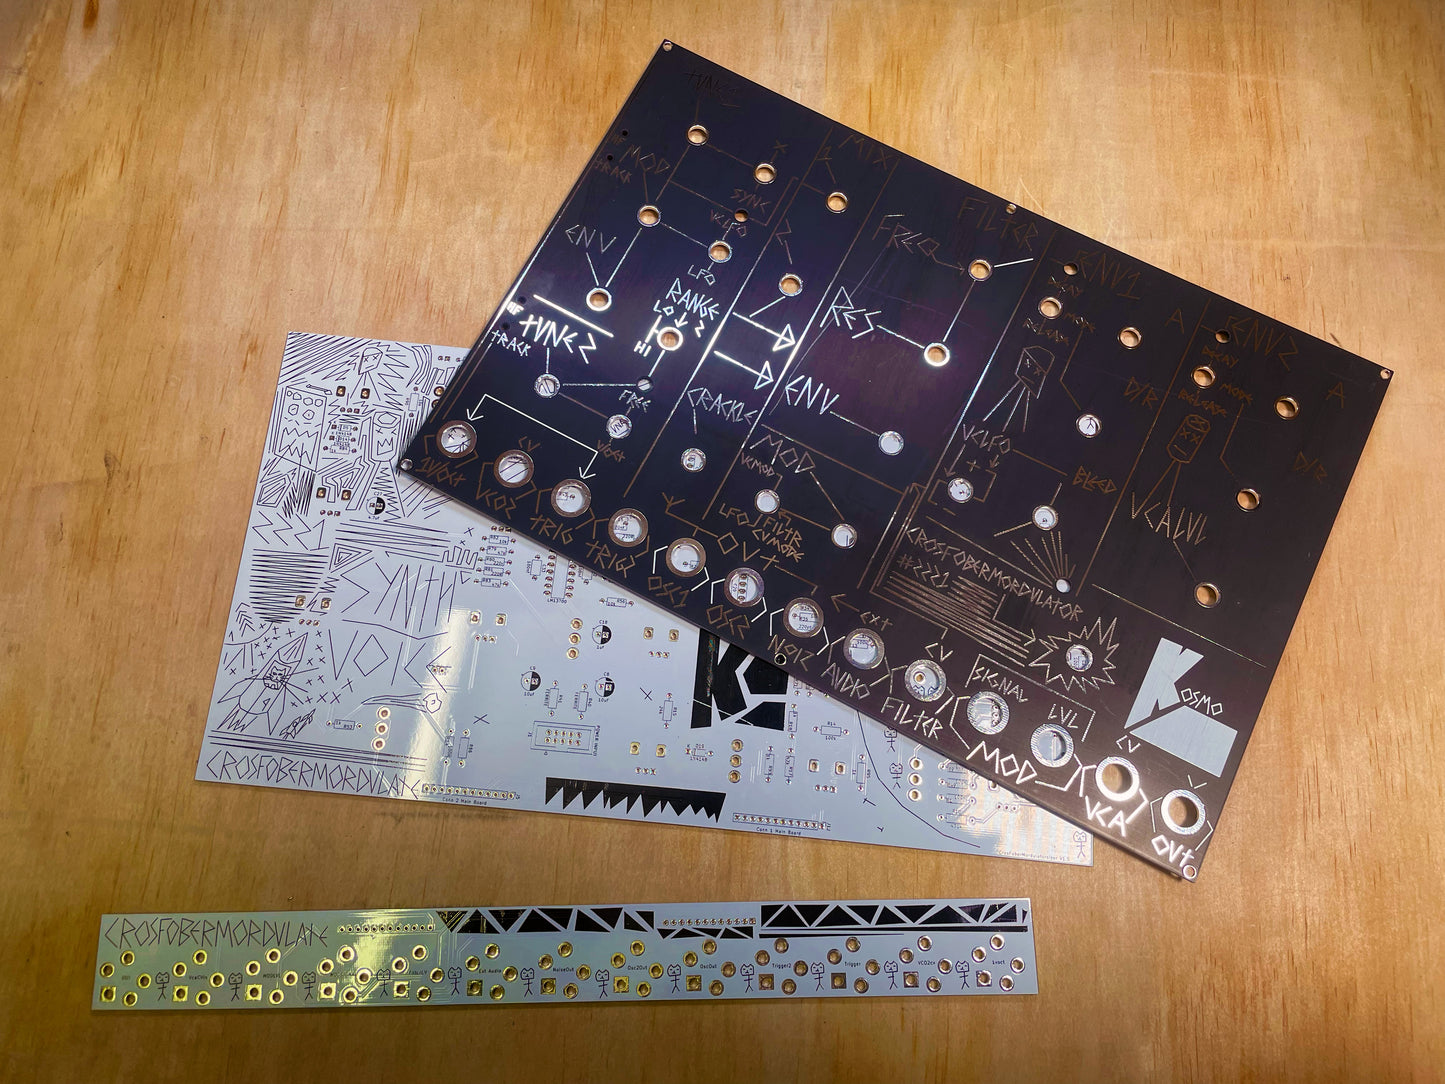 2221 CrosFoberMordulator Synth Voice PCB and PANEL’s